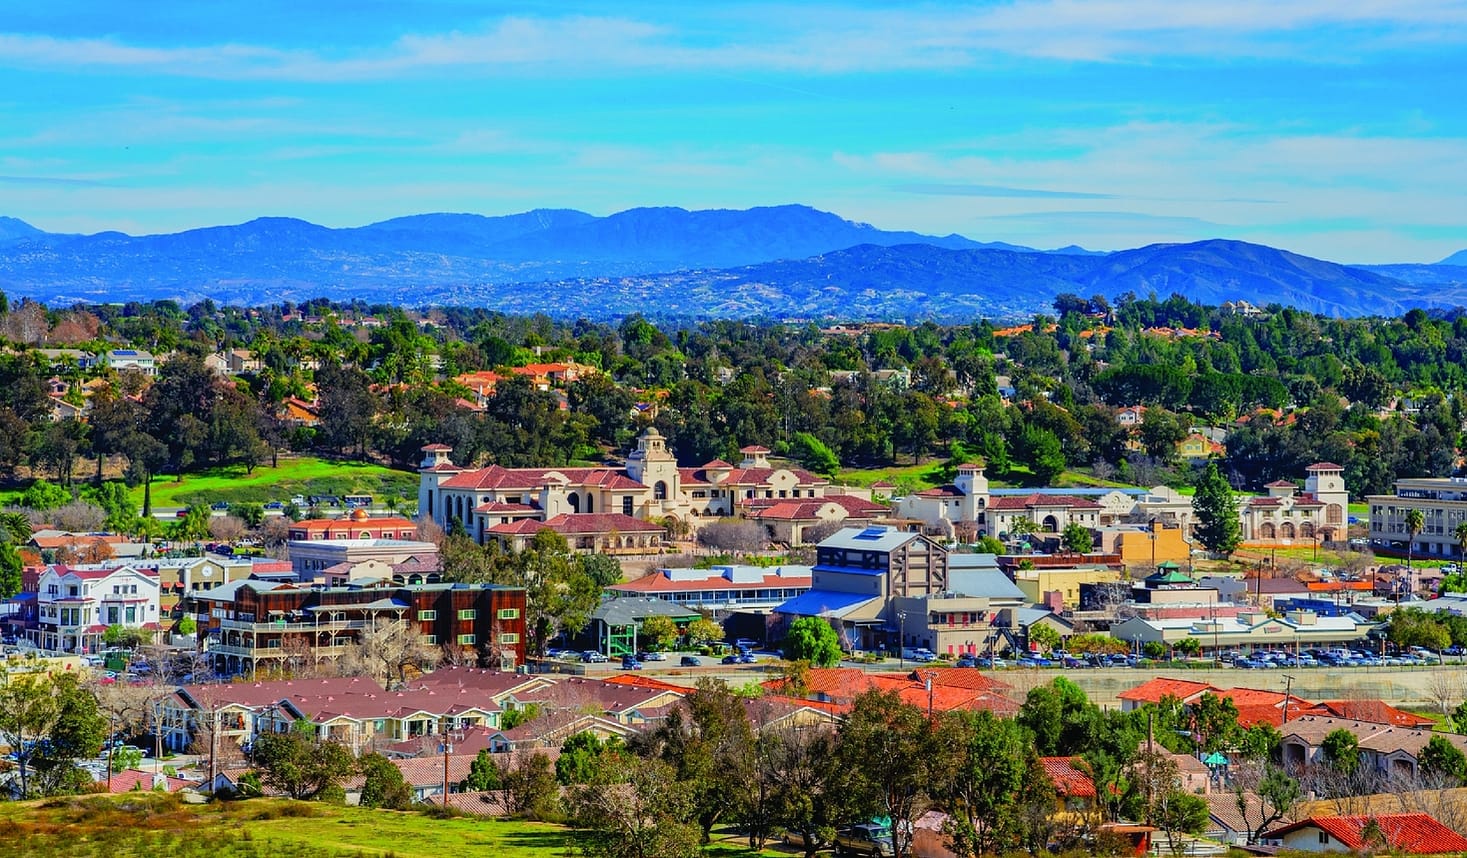 Featured image for “Things To Do in Temecula, CA”